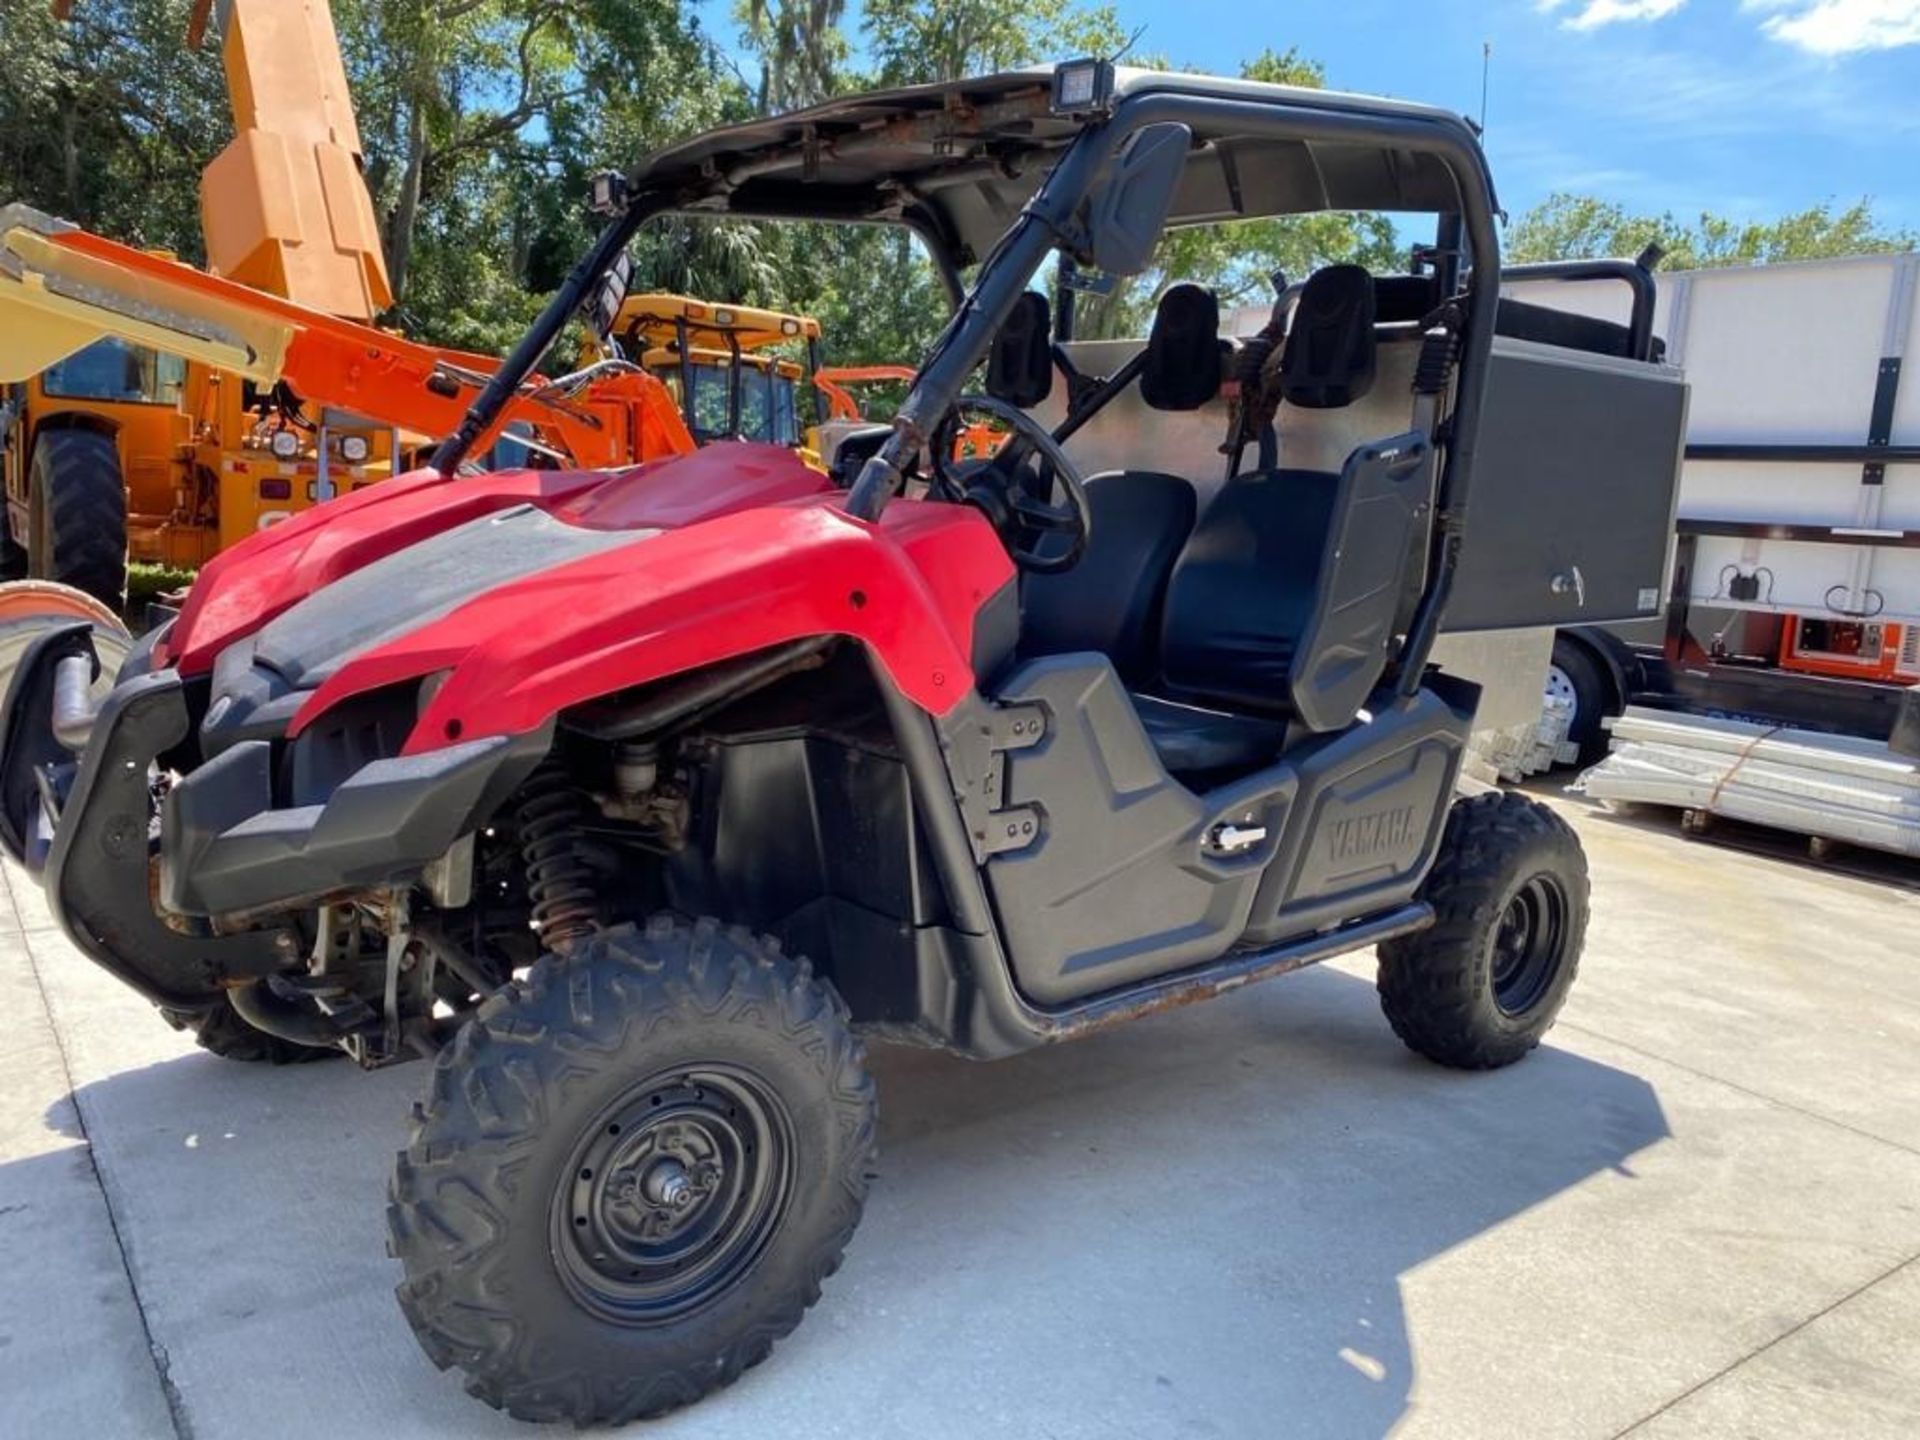 YAMAHA UTV WITH TOOL/STORAGE BIN, HAS RUST ON UNDER CARRIAGE AND FRAME, RUNS AND OPERATES